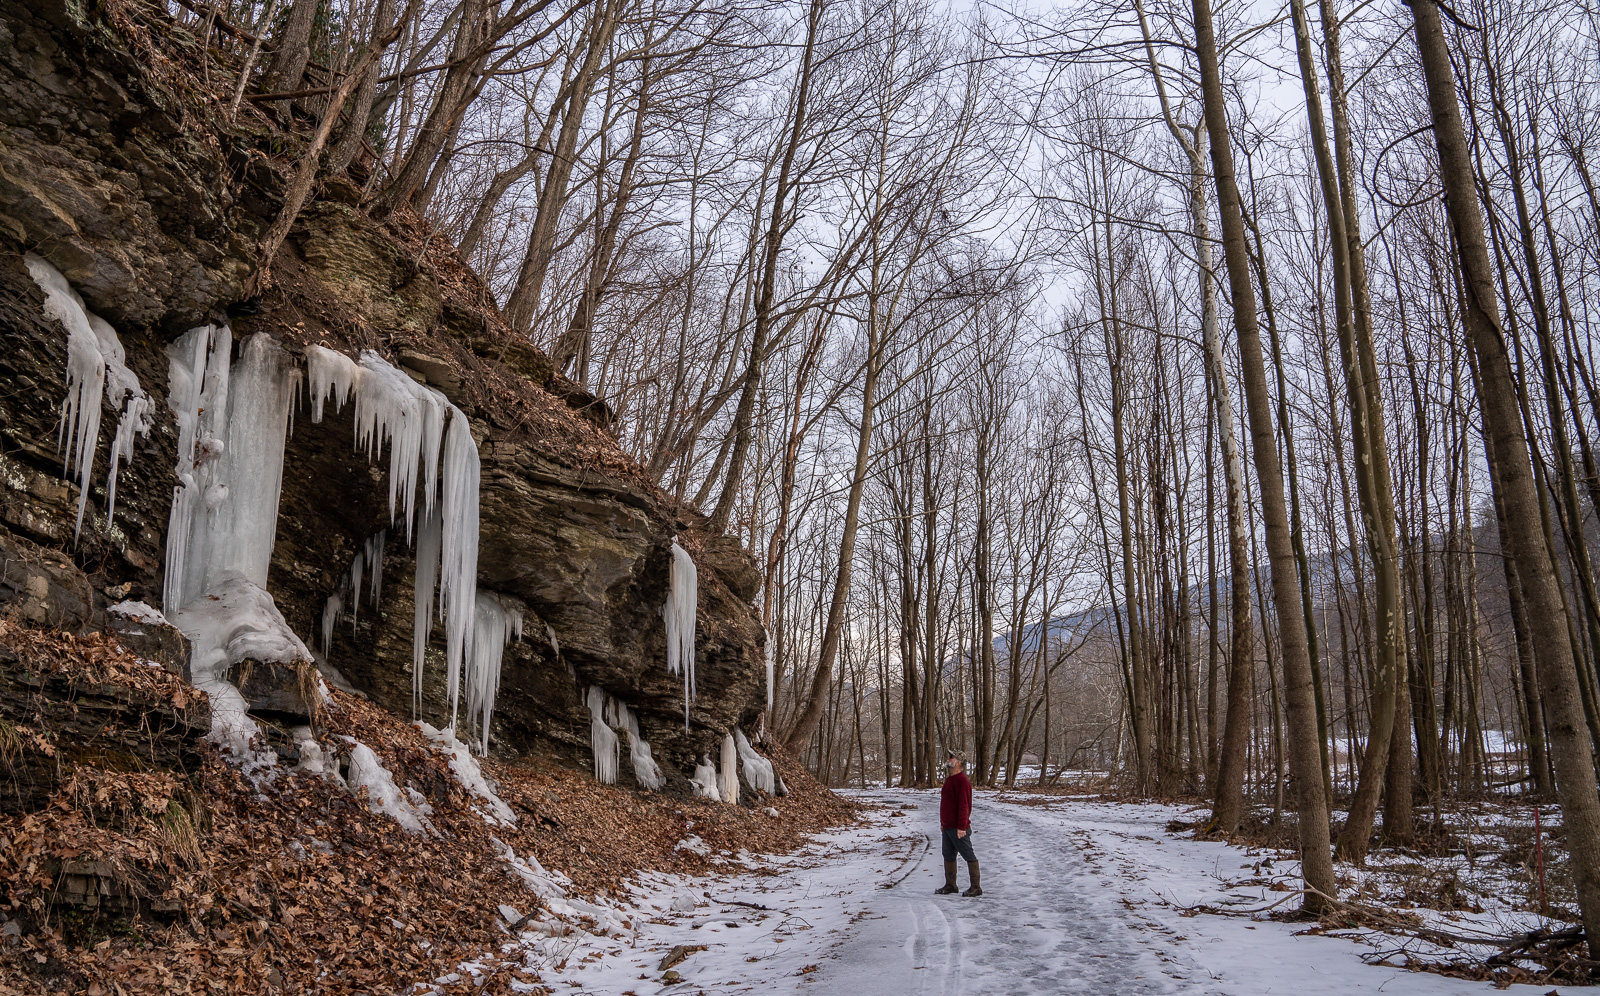 A man on an snow and ice covered trail looks up at bare tree branches and a small cliff face covered with icicles